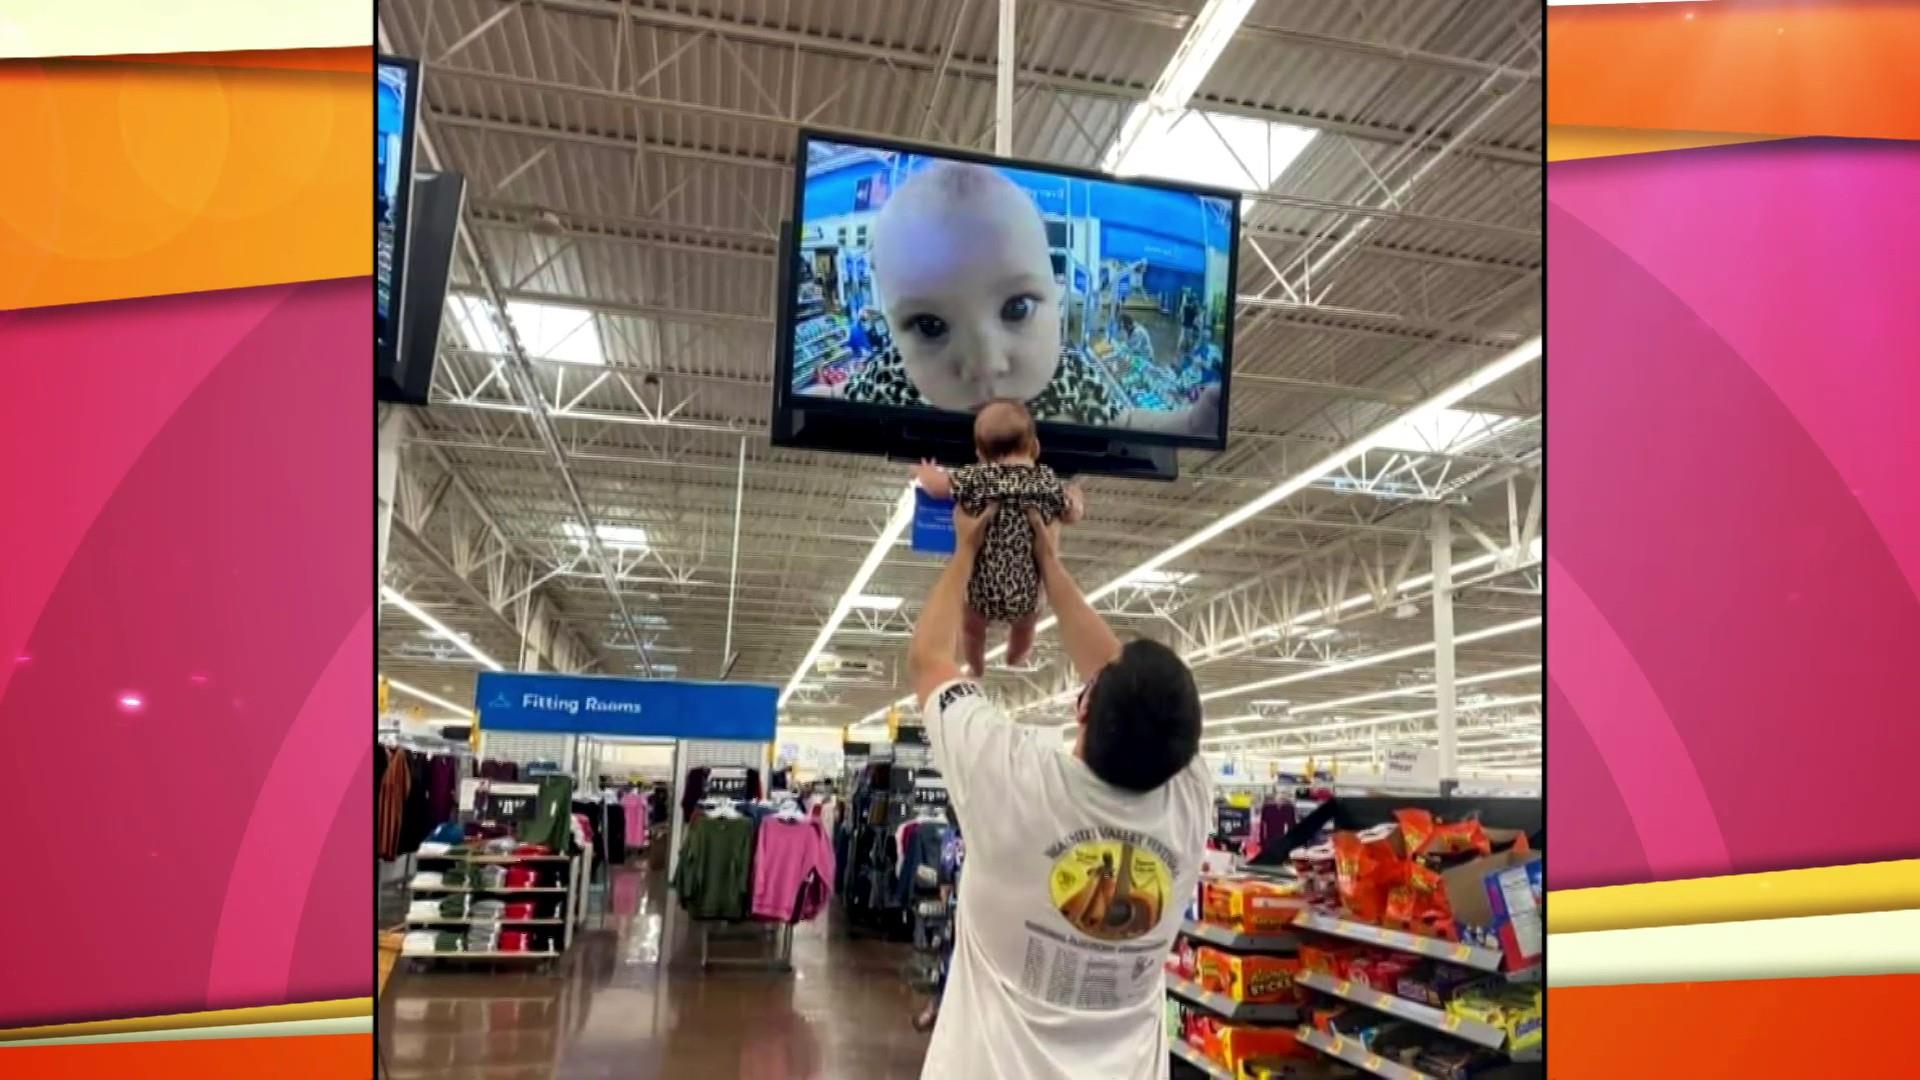 Baby's silly Walmart photo is a viral hit